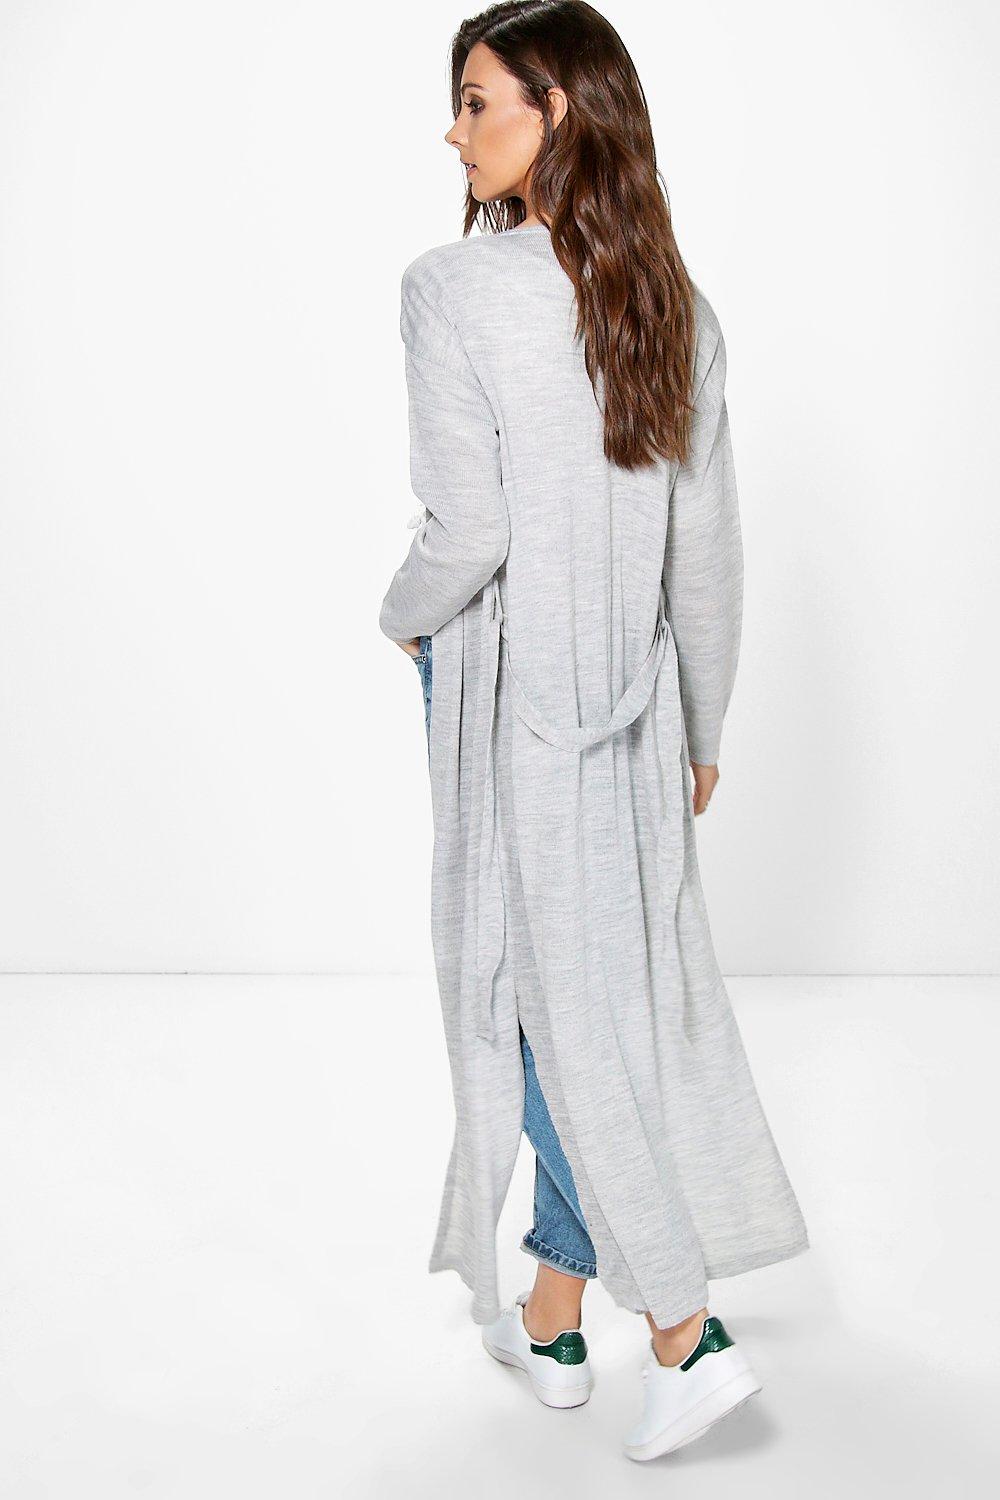 Alexis Belted Duster Cardigan